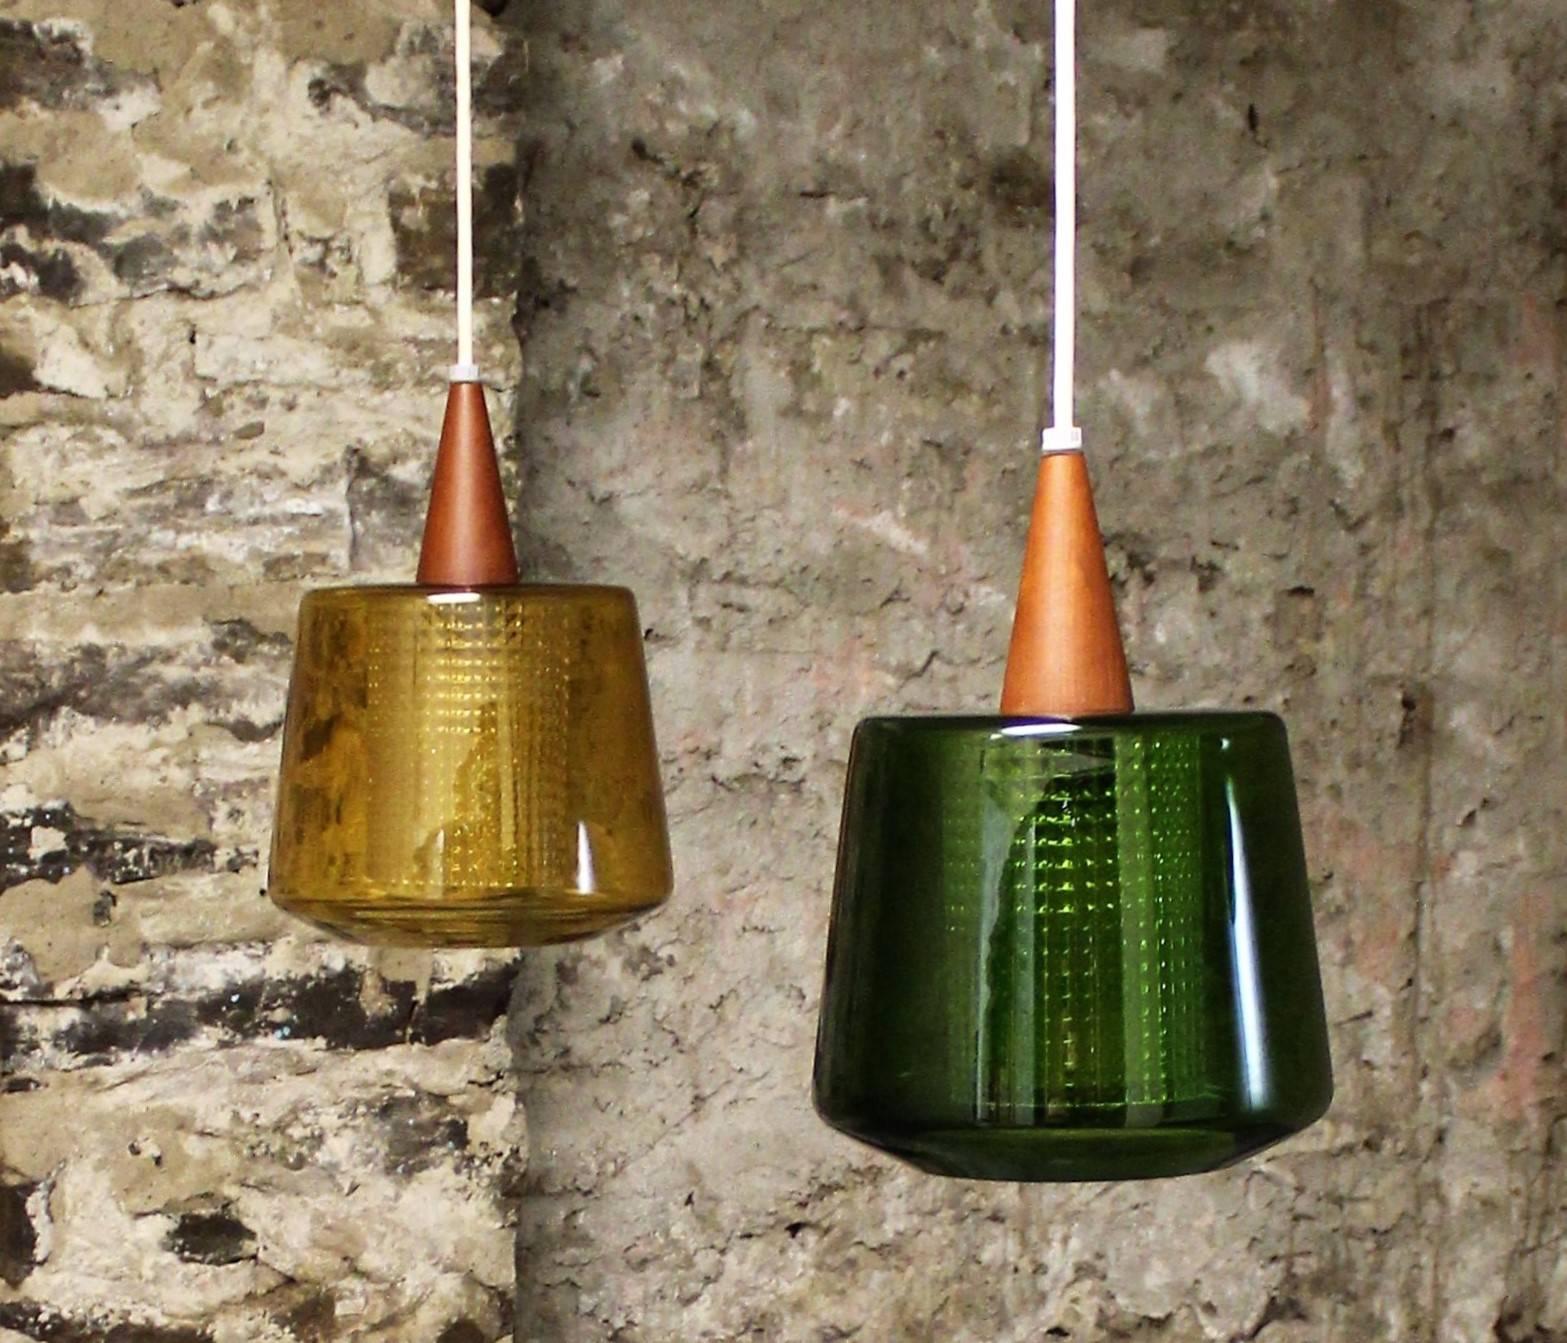 Pair of Carl Fagerlund pendant lights for Orrefors. One light shade is green while the other is amber. Each light has a teak wood fitting and clear patterned glass cylinders on the inside.

Scandinavian Modern, Mid-Century Modern.